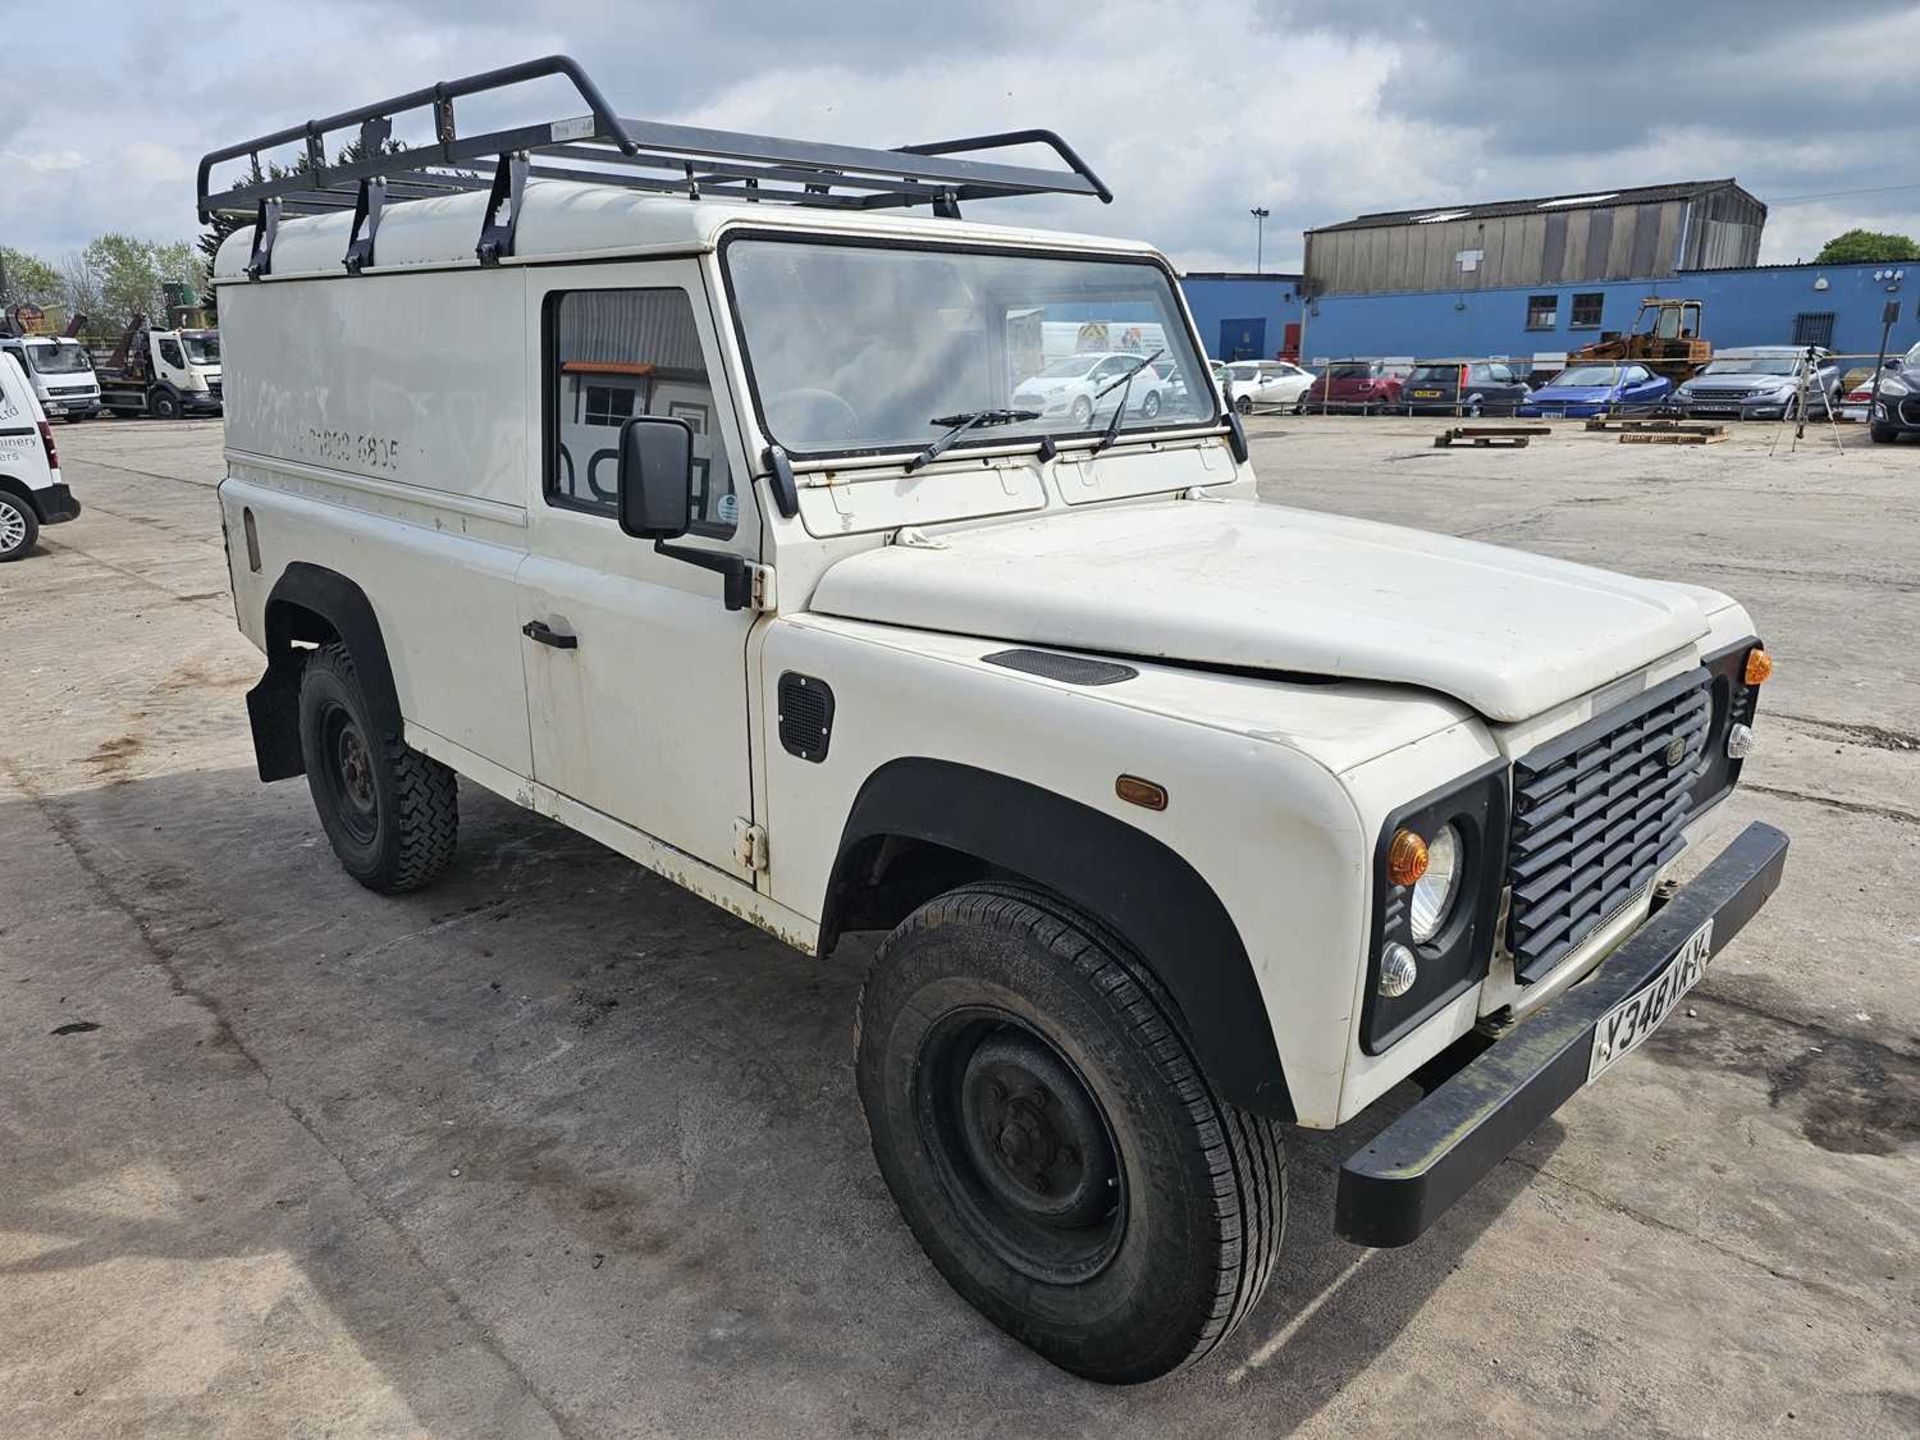 2001 Landrover Defender 110 TD5, 4WD 5 Speed, Heavy Duty Tow Bar, Tacograph, (Reg. Docs. Available,  - Image 7 of 25